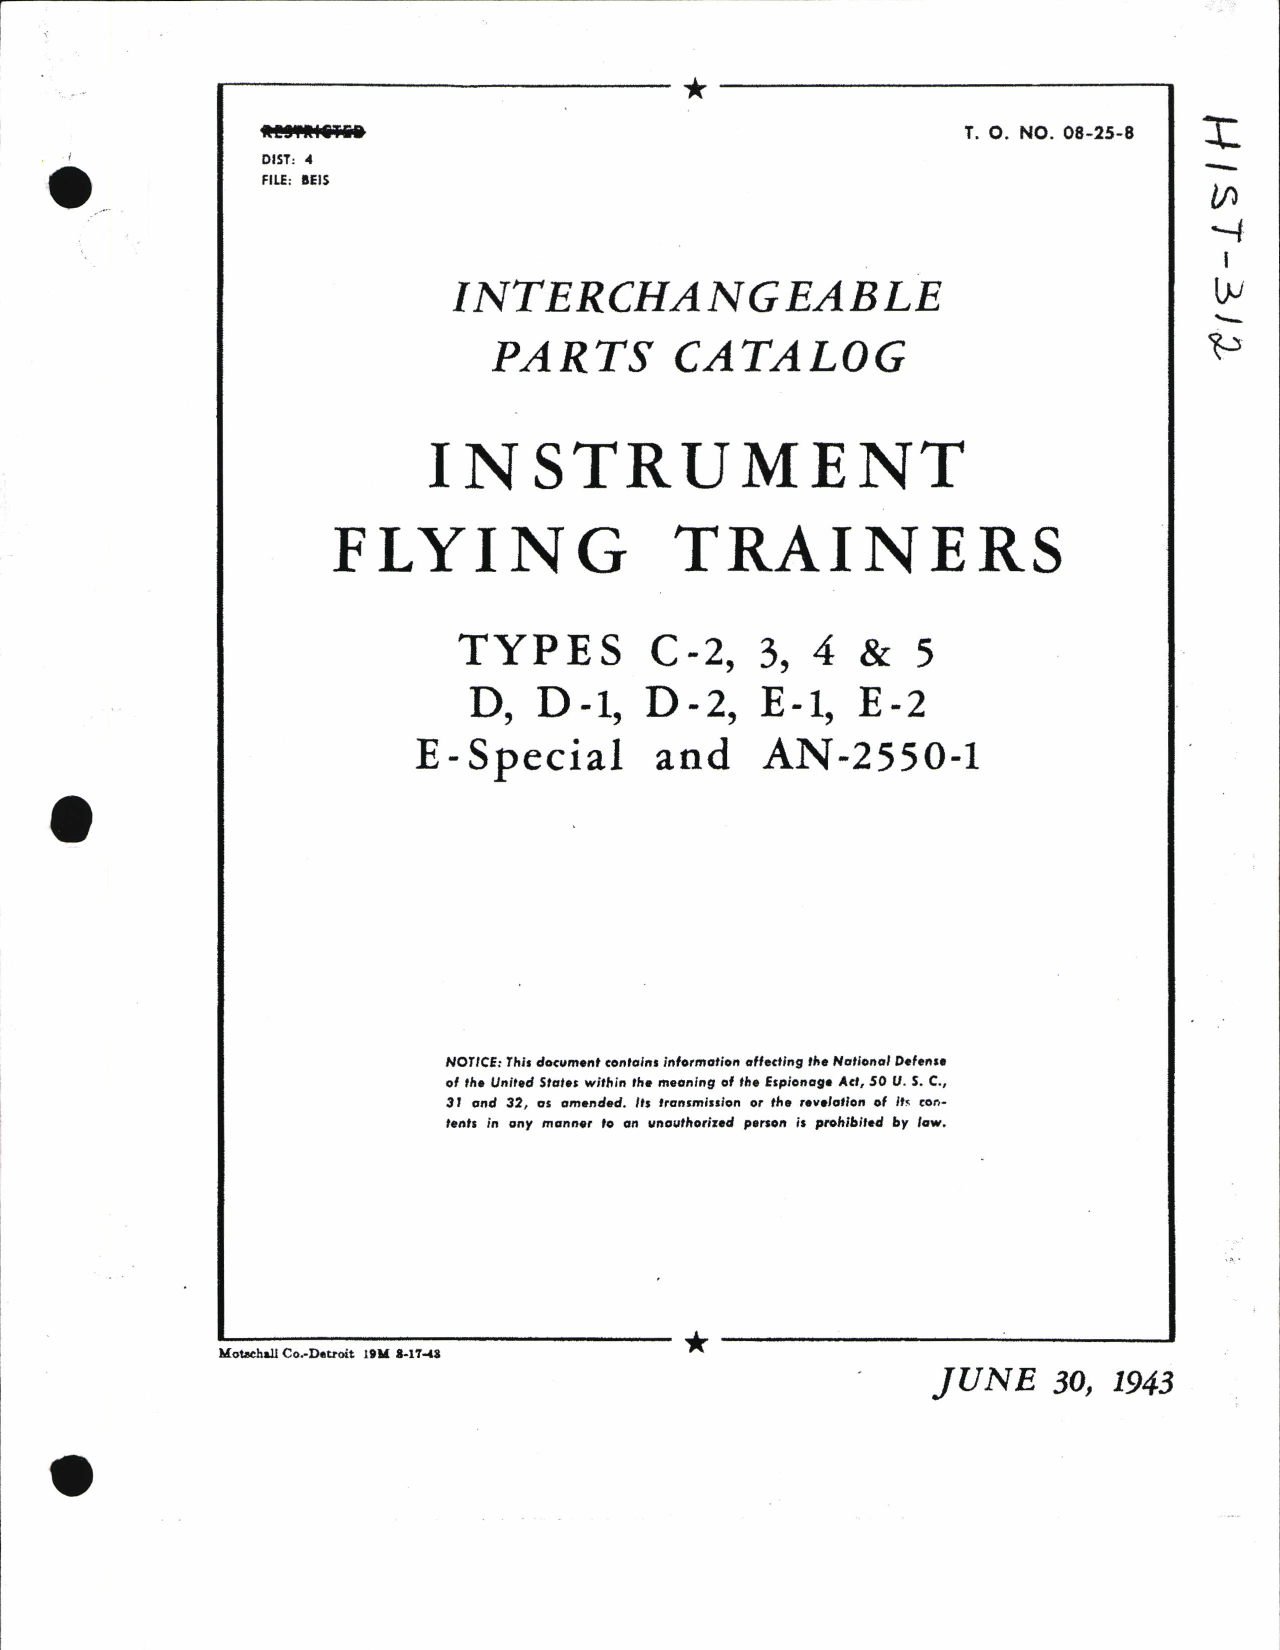 Sample page 1 from AirCorps Library document: Interchangeable Parts Catalog for Instrument Flying Trainers